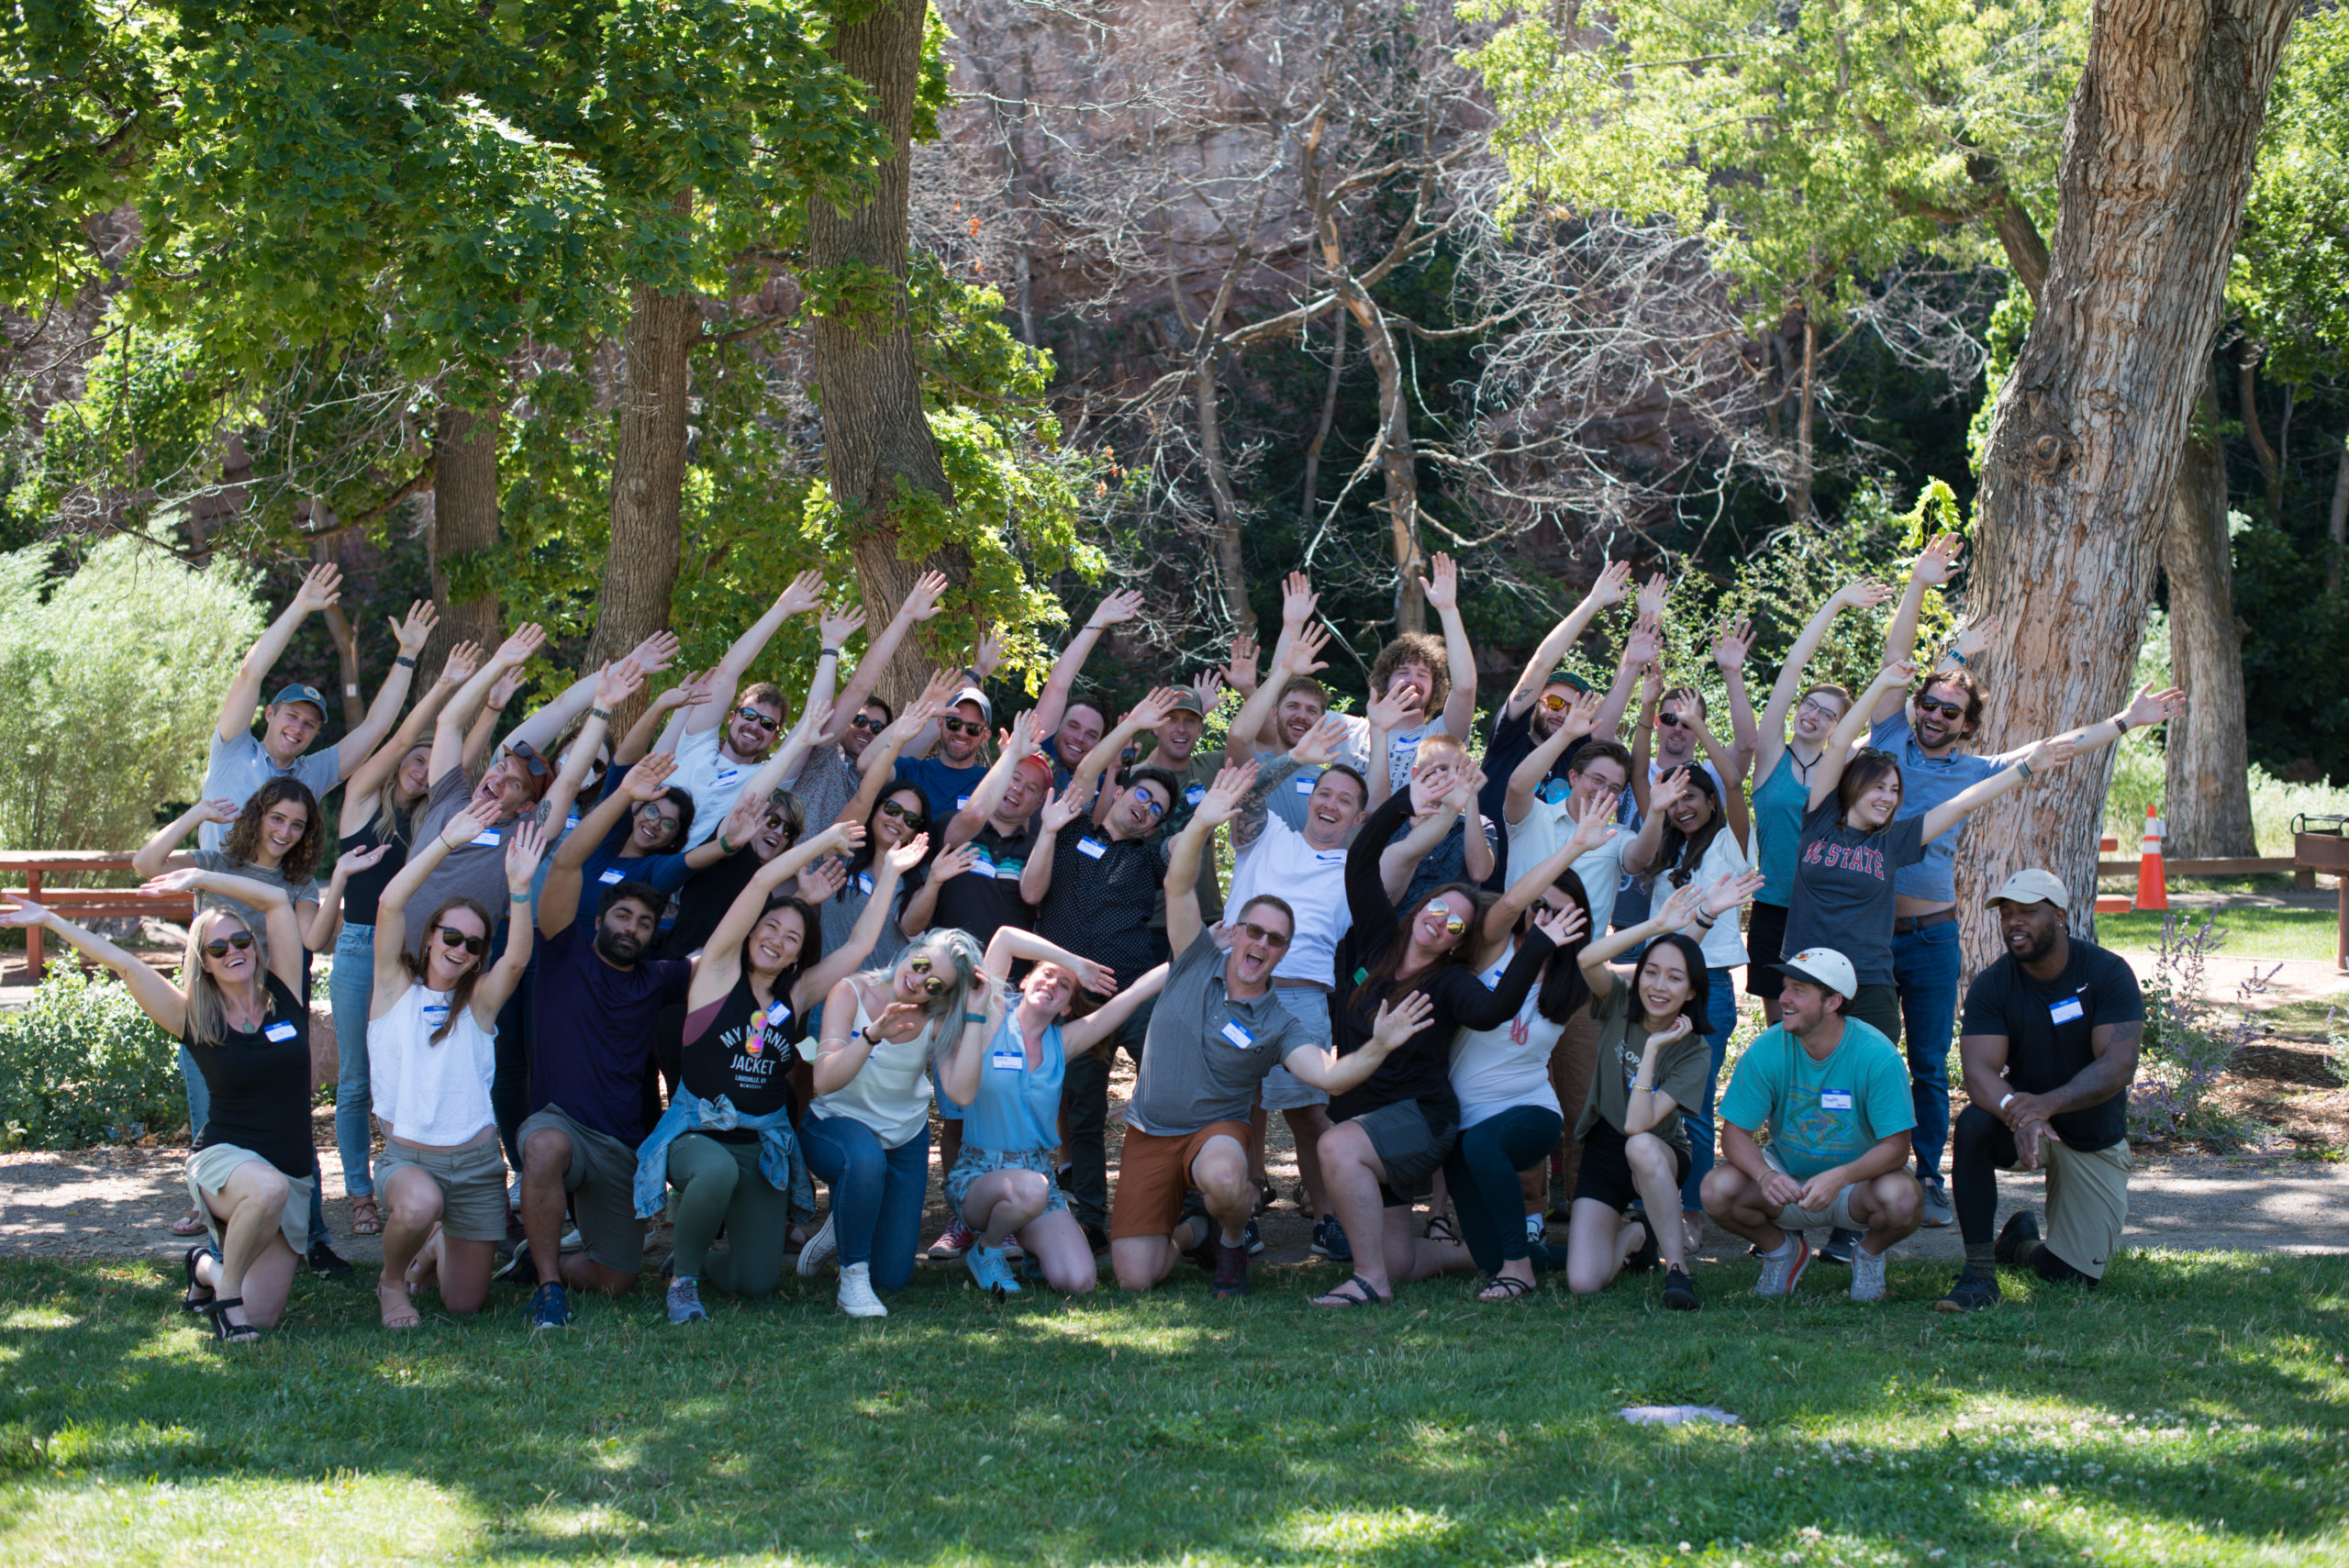 The Optera team gathers in a park on a sunny day, posing to the camera with their arms up as if on a roller coaster